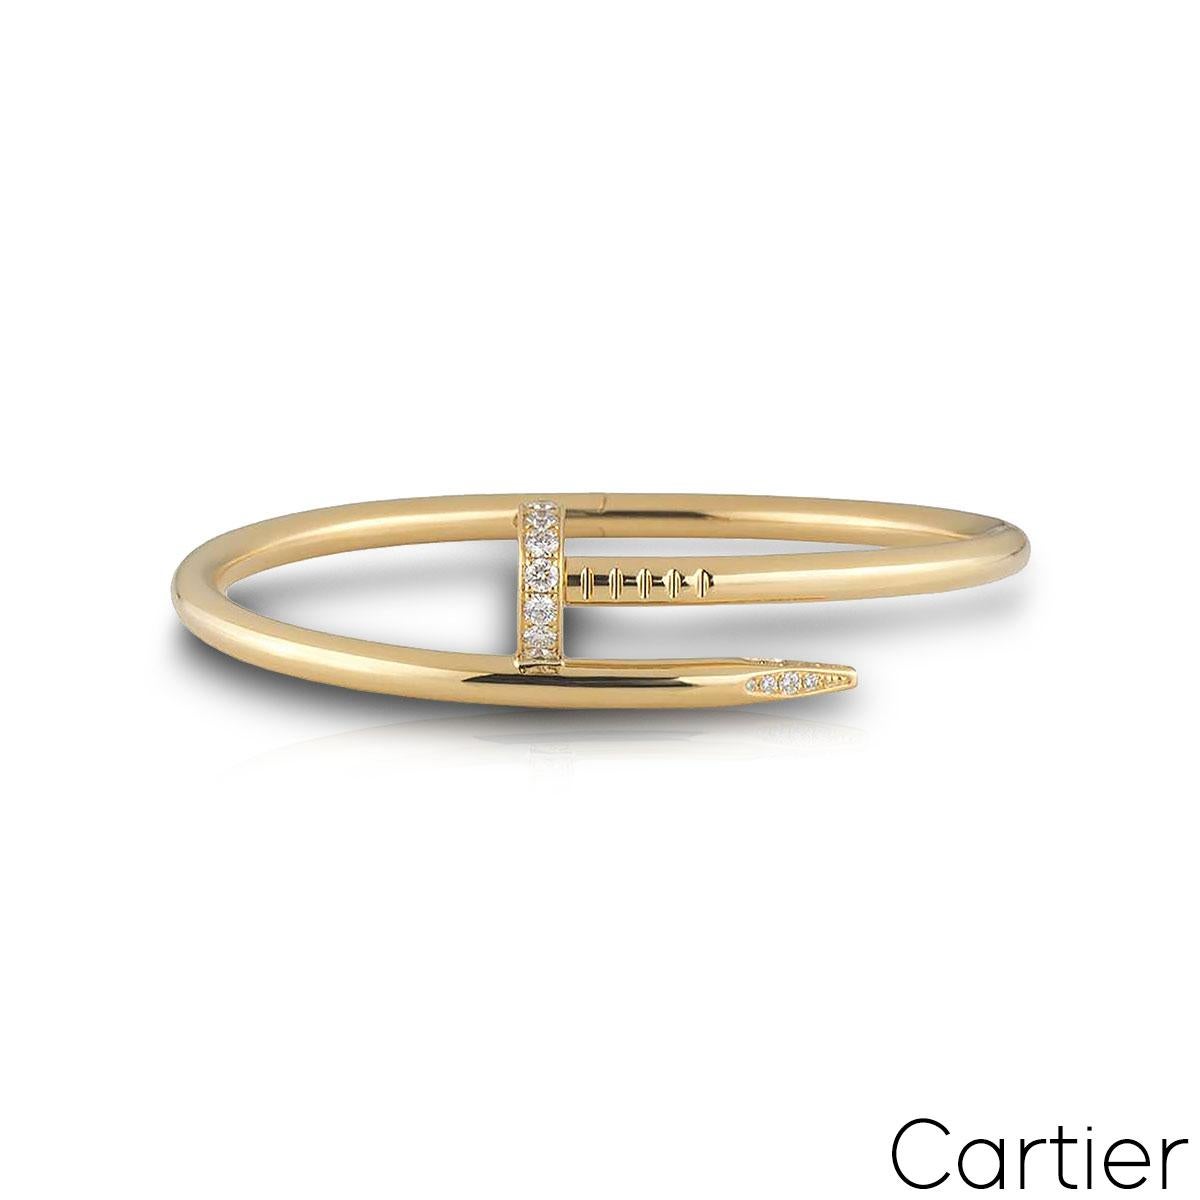 A stunning 18k yellow gold Cartier diamond bracelet from the Juste Un Clou collection. The bracelet is in the style of a nail and has 27 round brilliant cut pave diamonds set in the head and tip, totalling 0.54ct. The diamonds are predominantly F